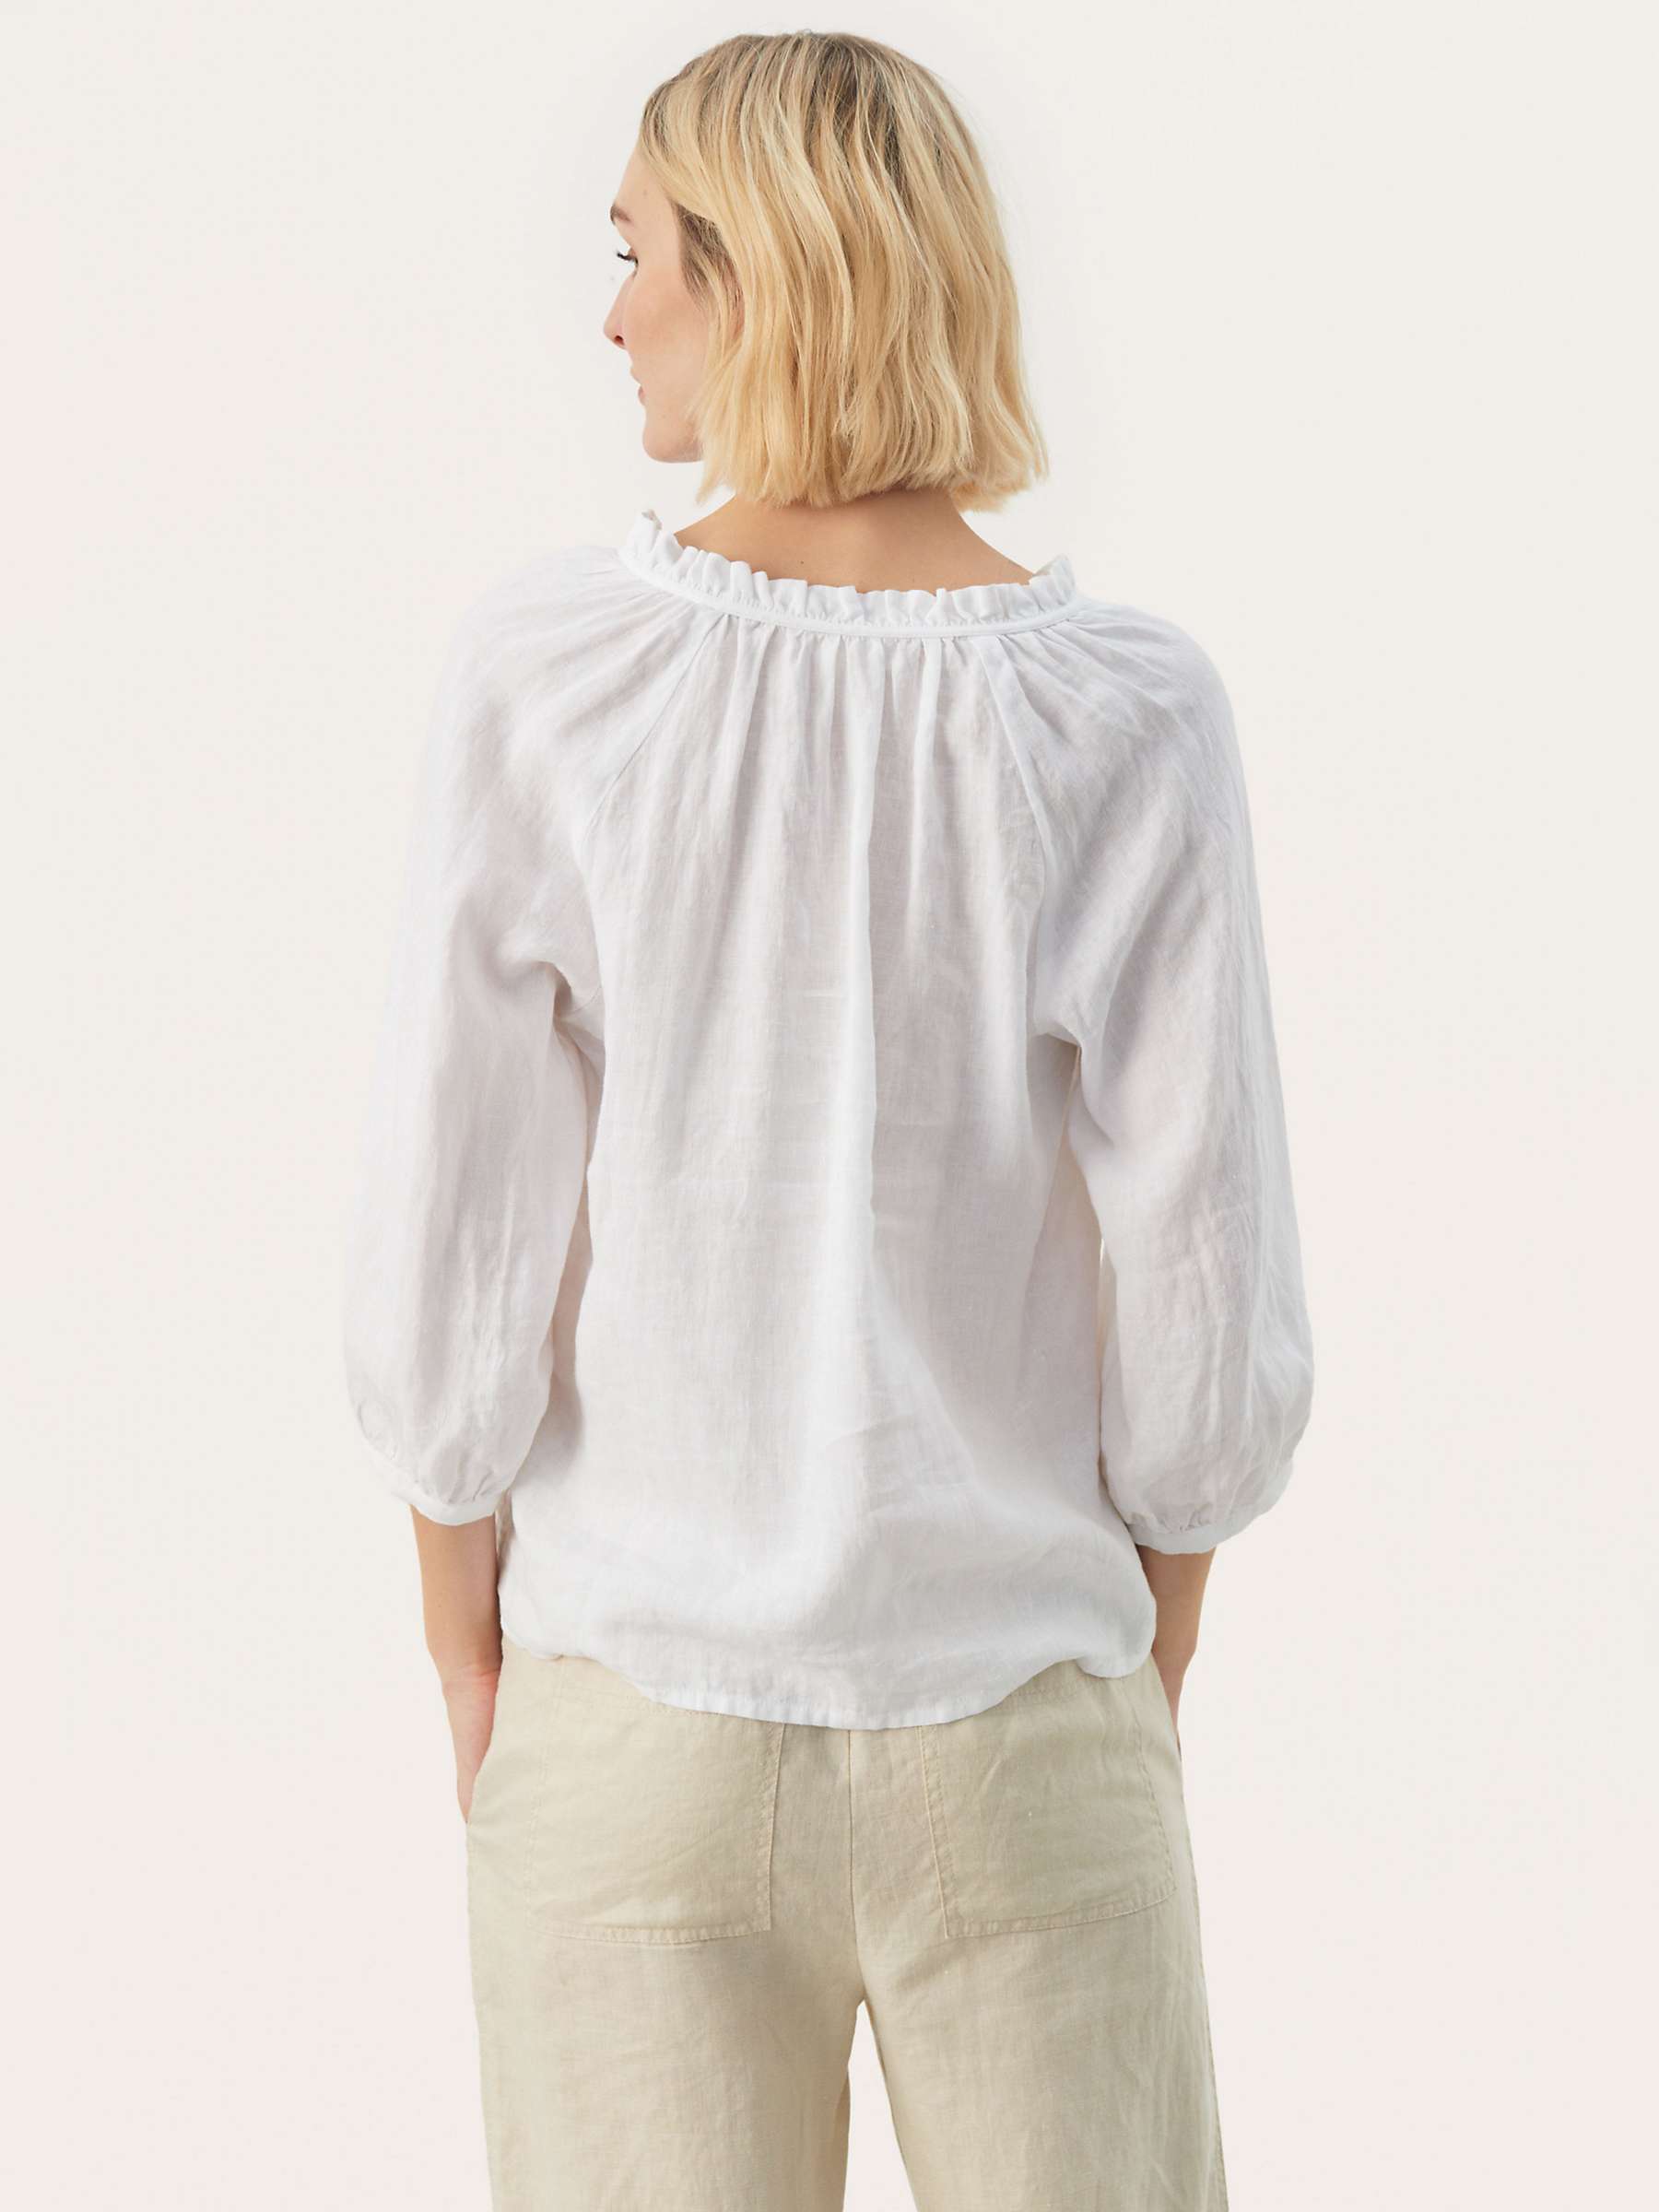 Buy Part Two Elody Linen Blouse Online at johnlewis.com